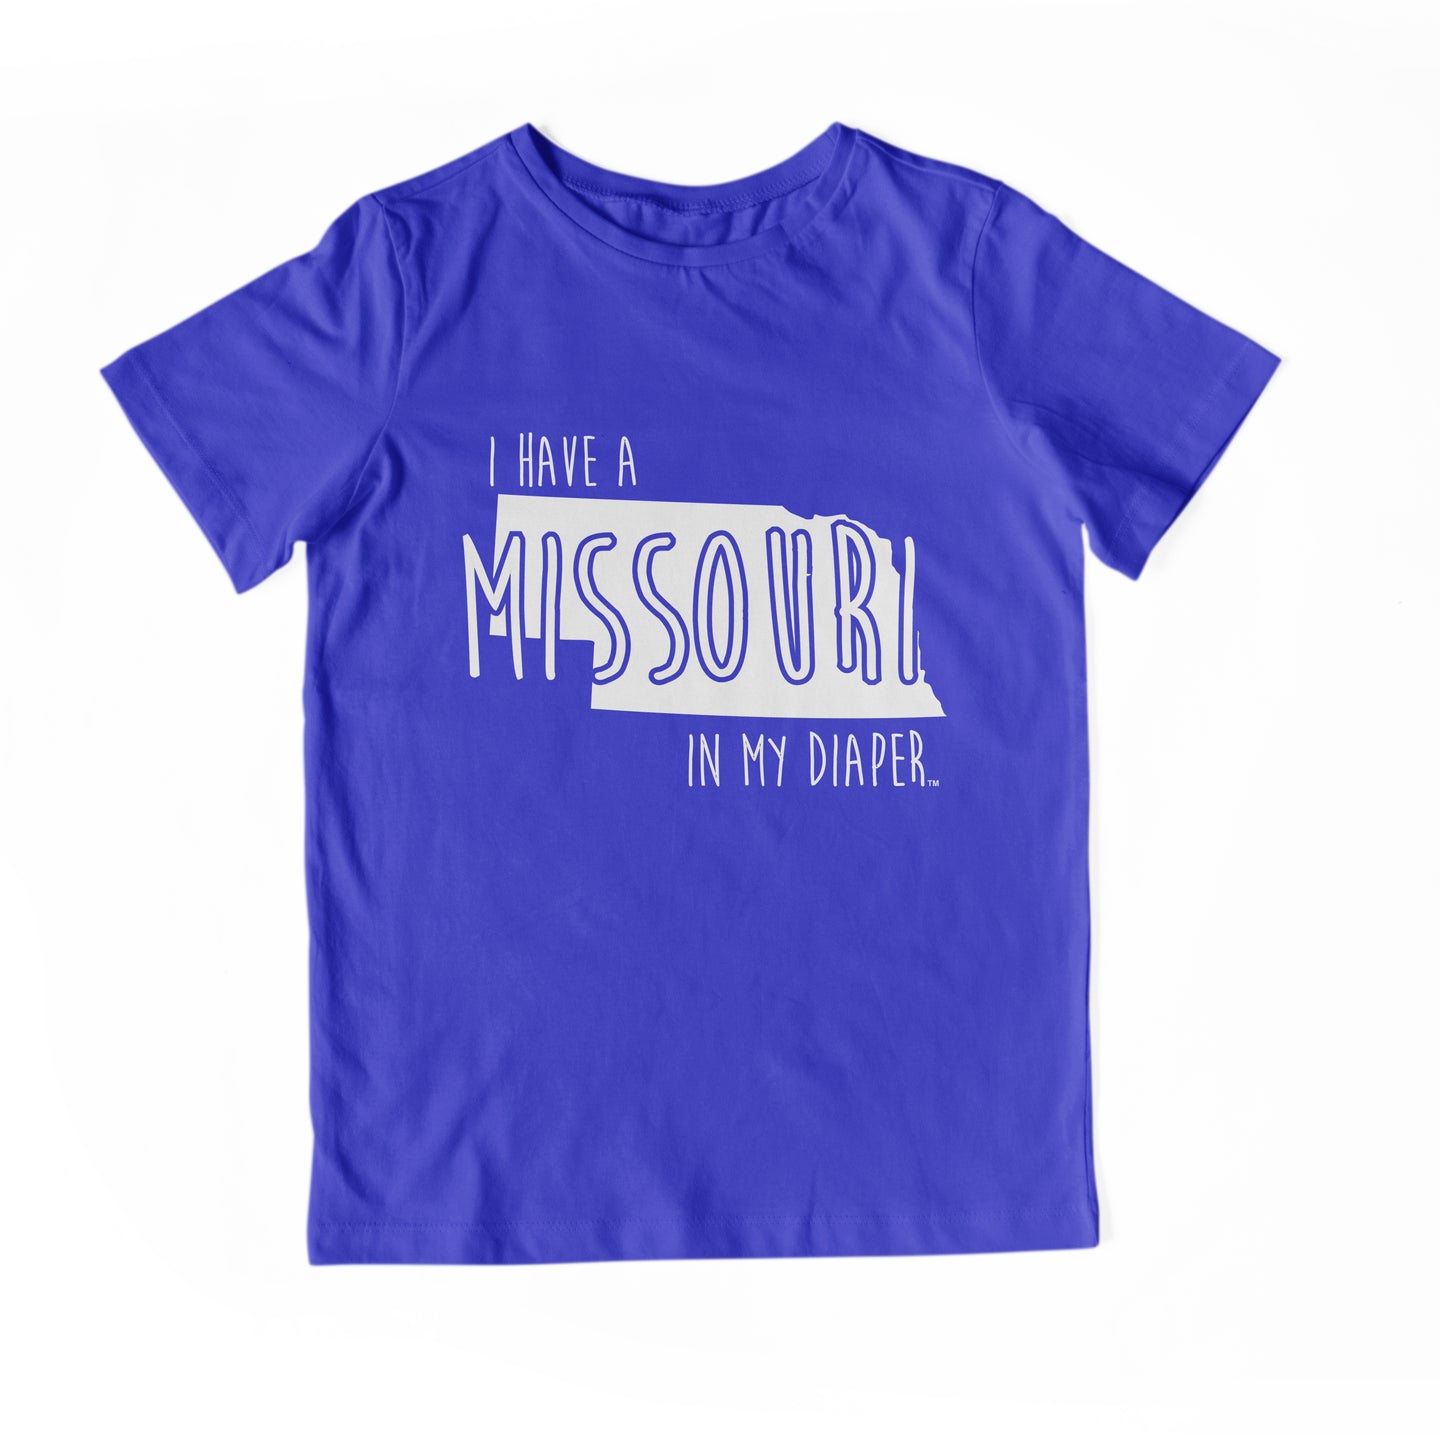 I HAVE A MISSOURI IN MY DIAPER Child Tee